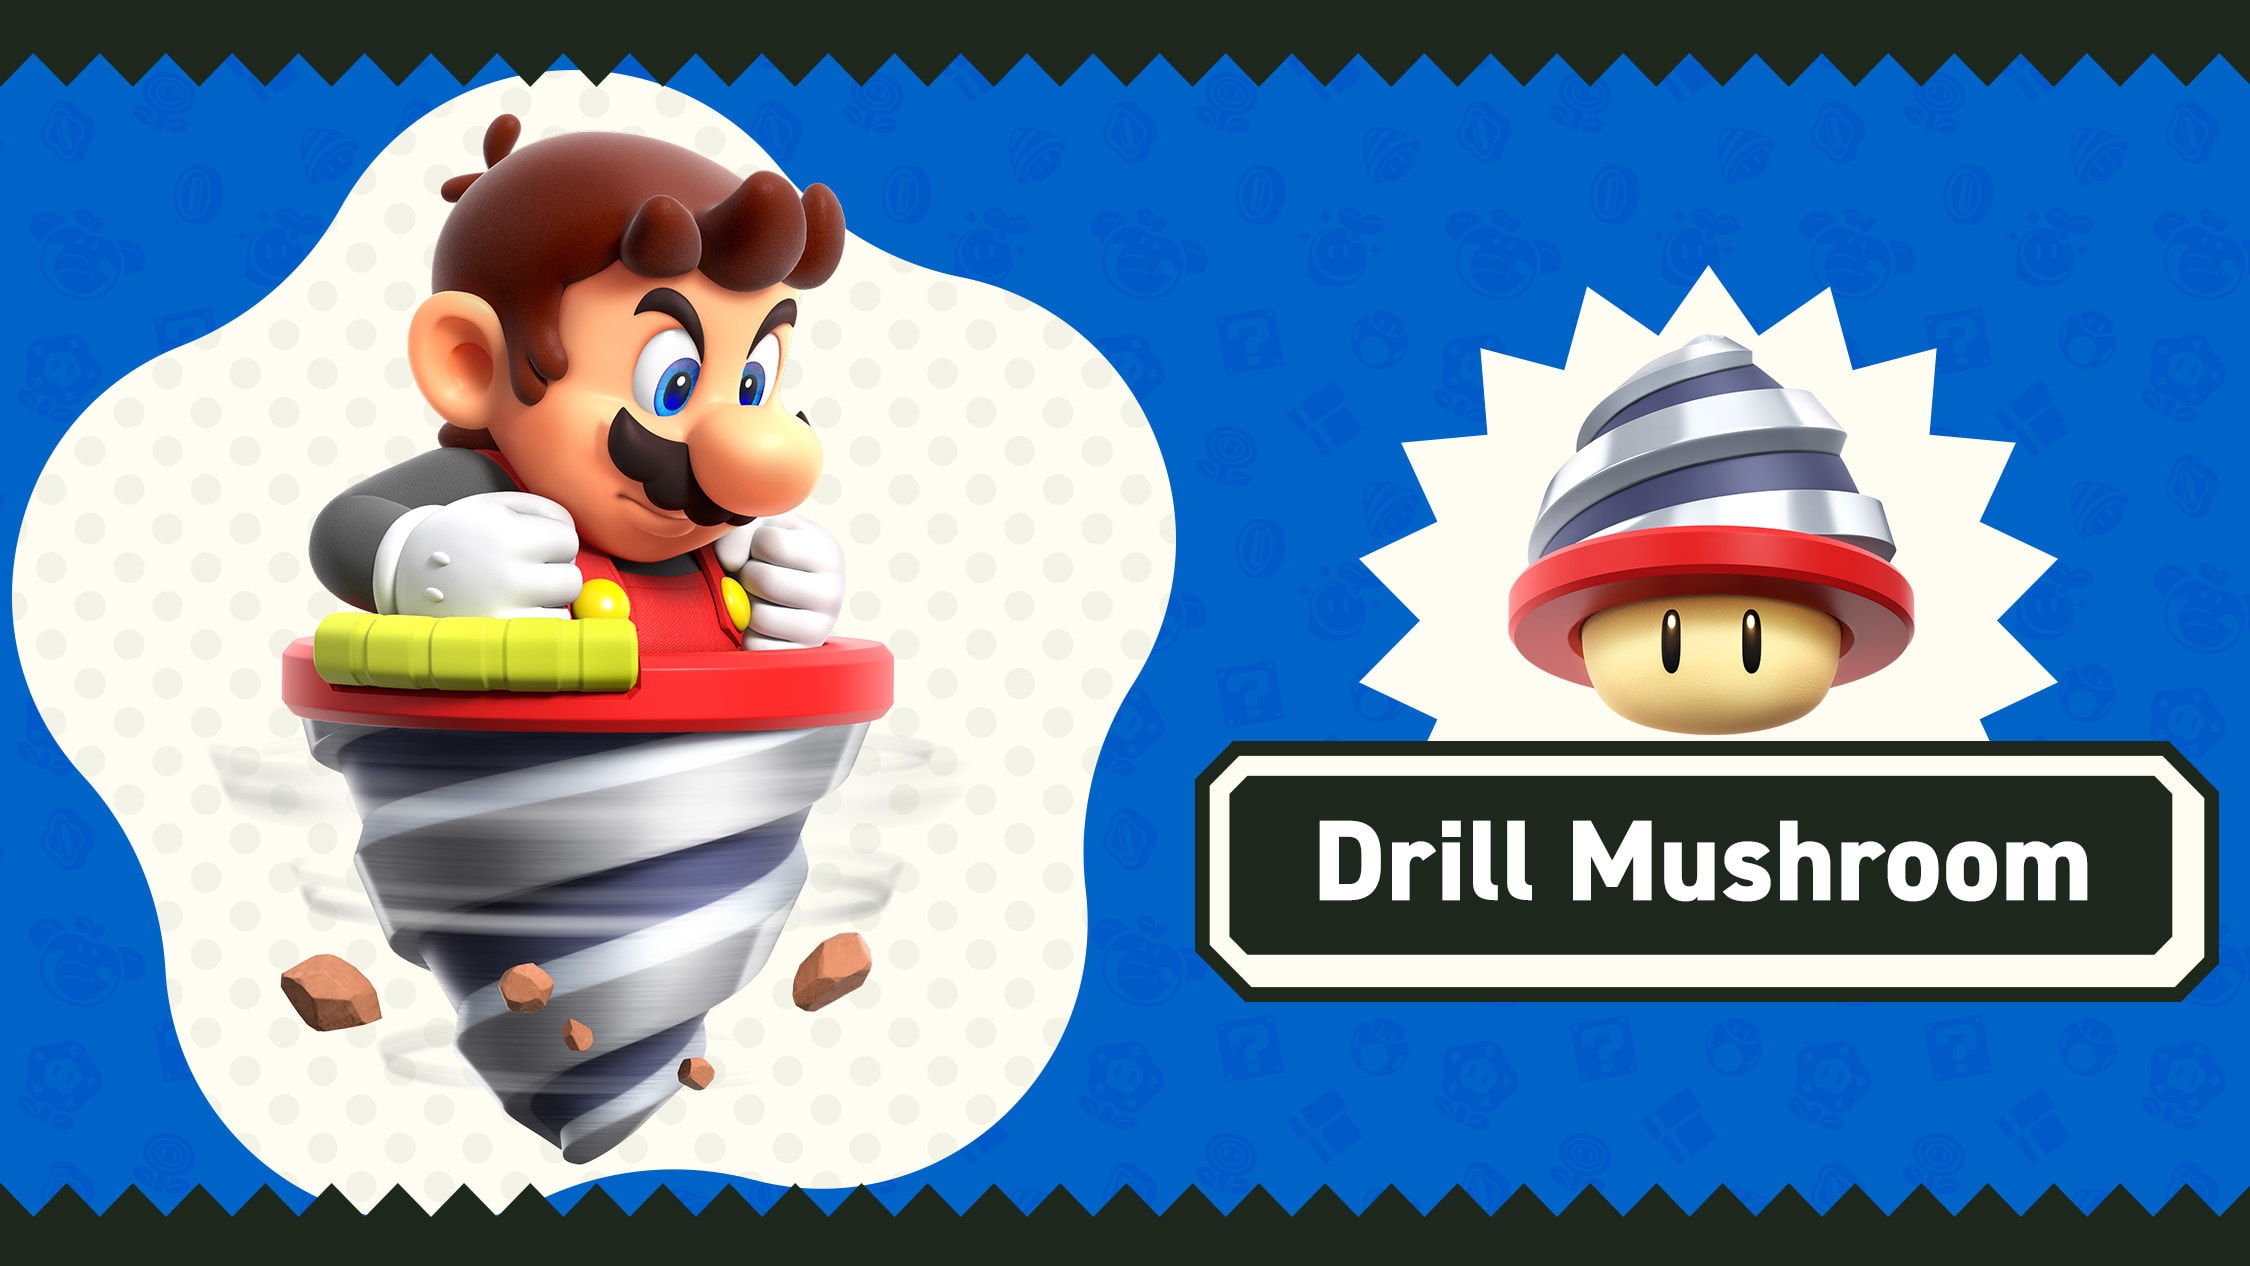 Get a jump on Super Mario Bros. Wonder with these powerful power-ups - Drill